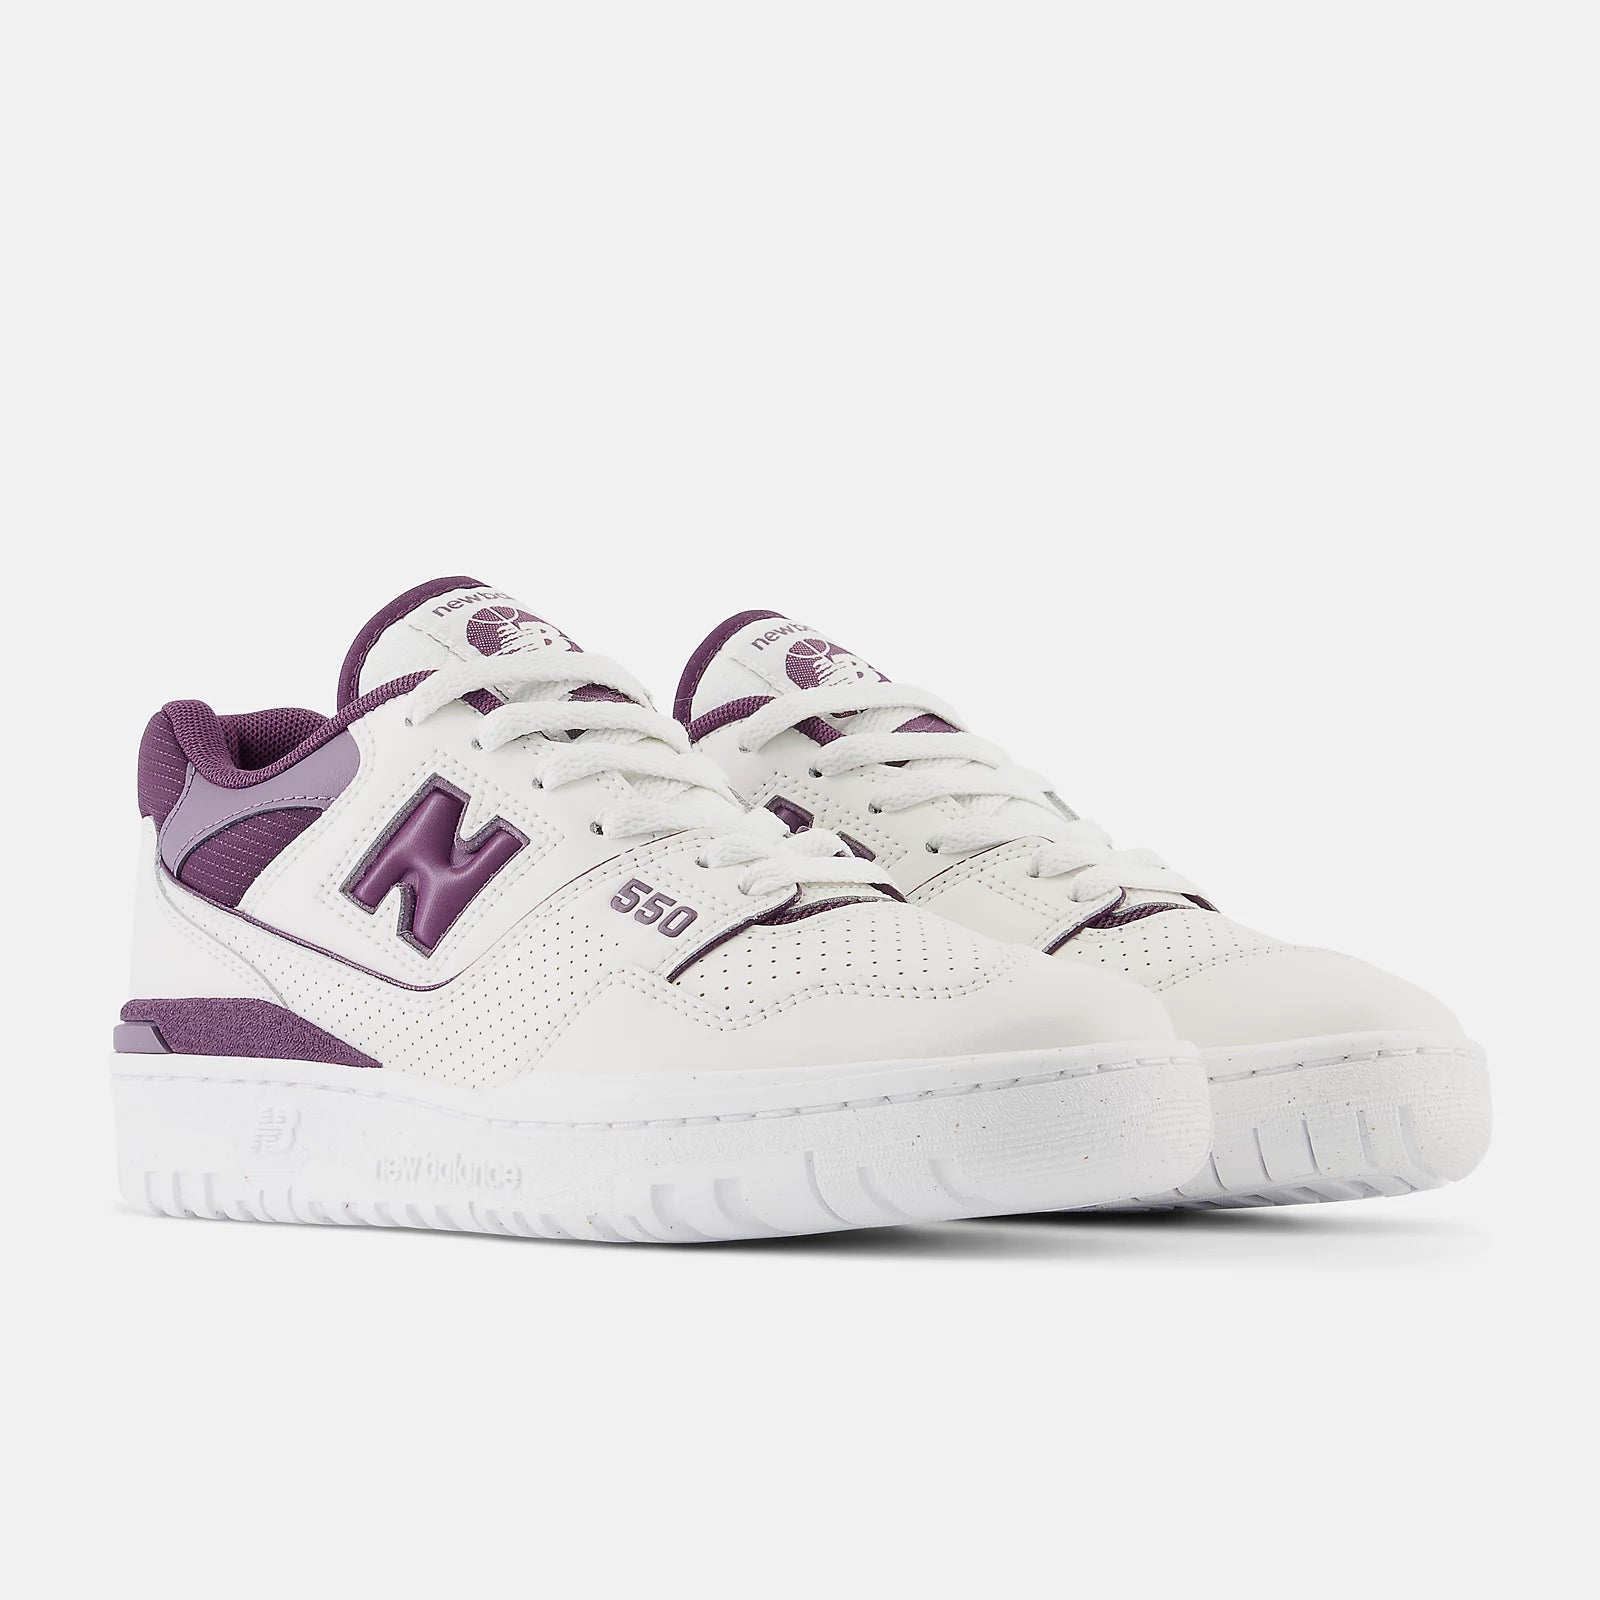 NEW BALANCE Sneakers Donna BBW550 White/Violet